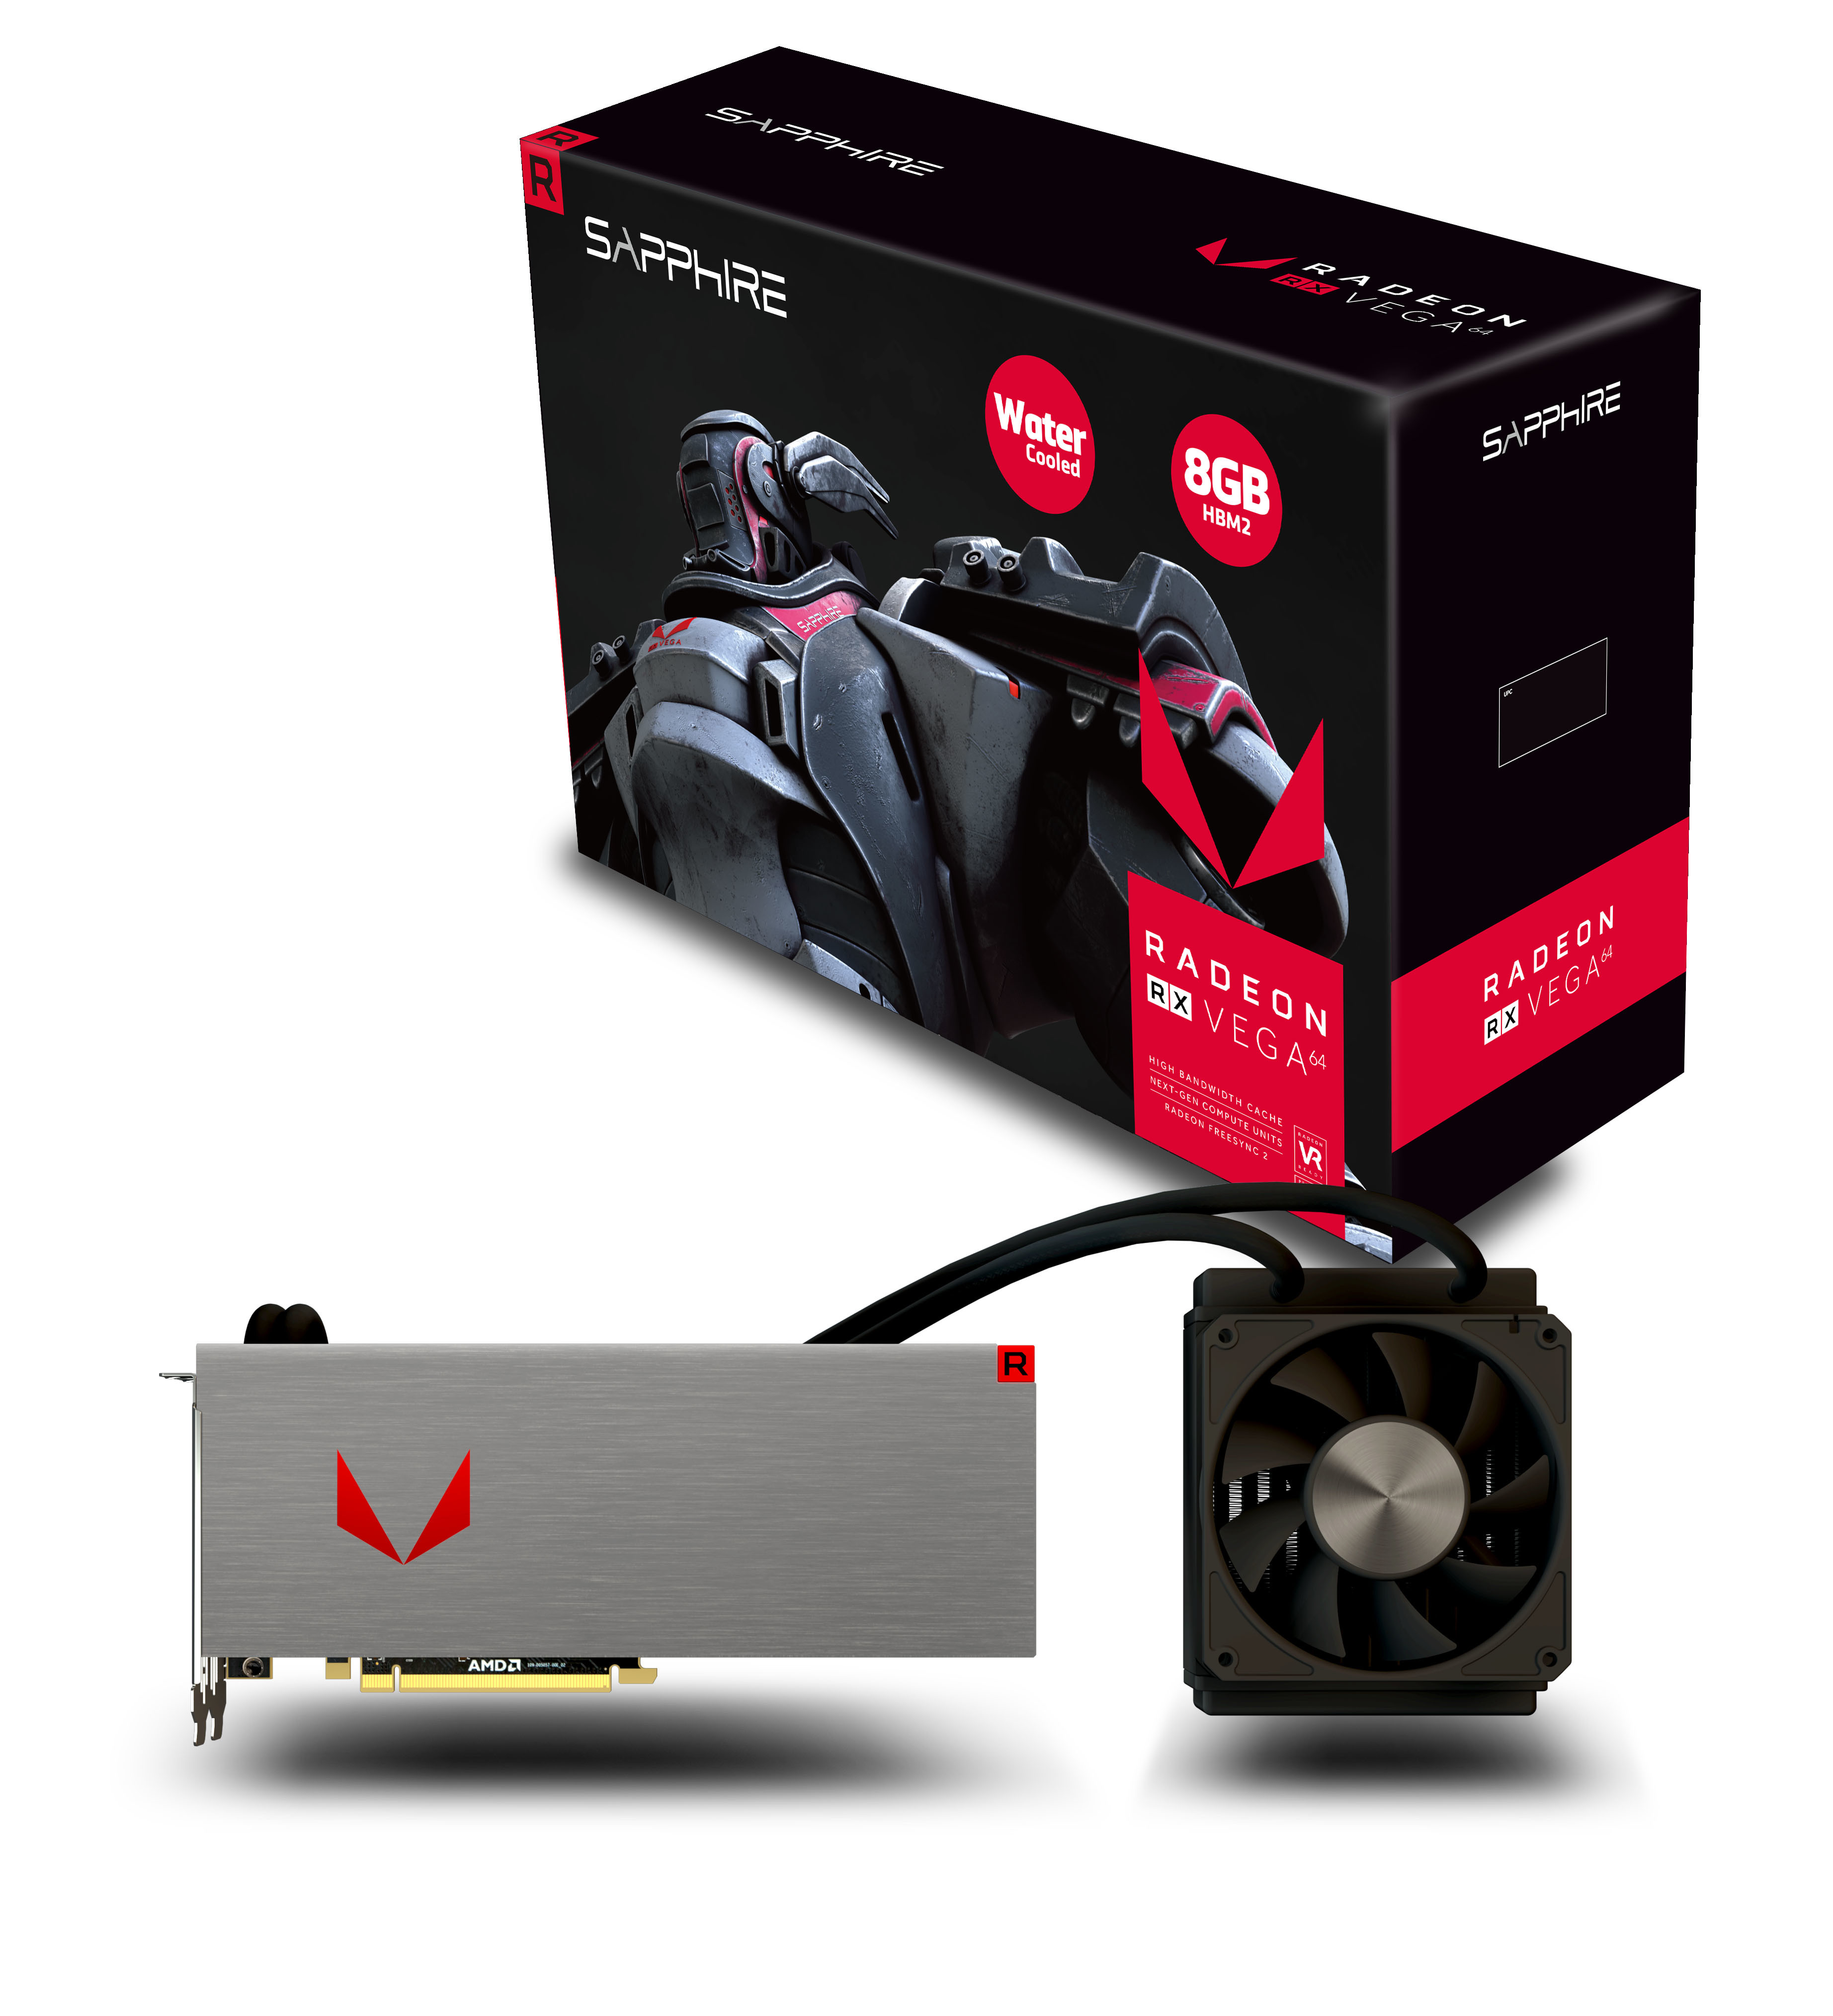 Media asset in full size related to 3dfxzone.it news item entitled as follows: EA annuncia C & C: Red Alert 3 su PC, Playstation 3 e Xbox 360 | Image Name: new26834_SAPPHIRE-Radeon-RX-Vega-64-8GB-HBM2_6.jpg